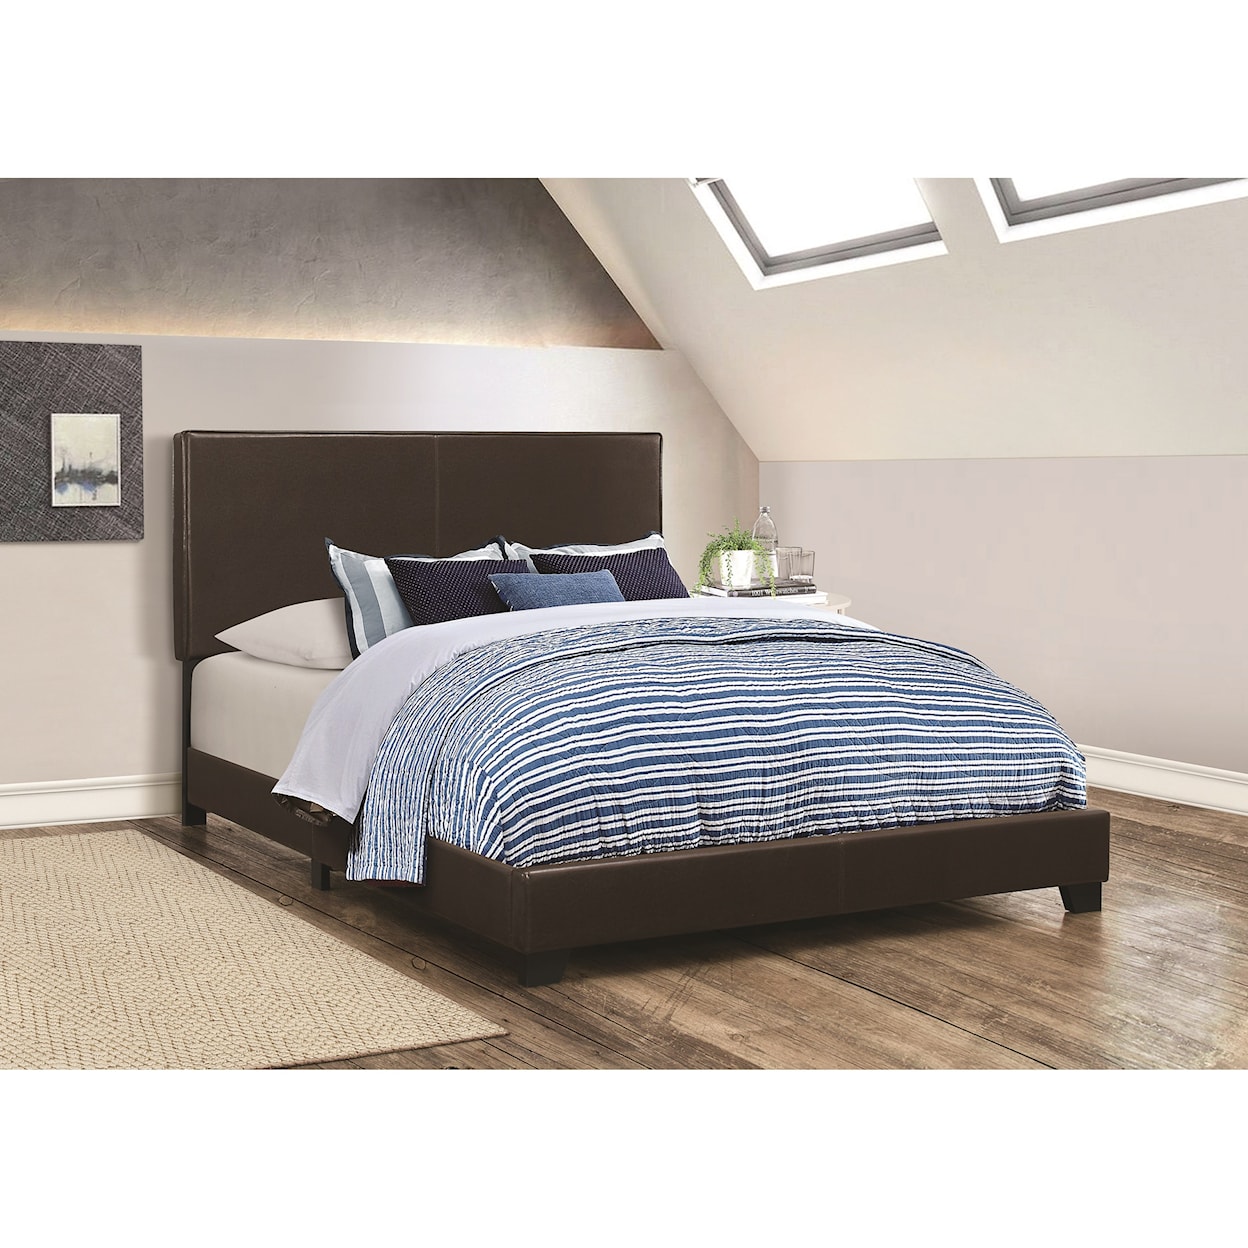 Coaster Dorian Brown BROWN BYCAST TWIN BED |